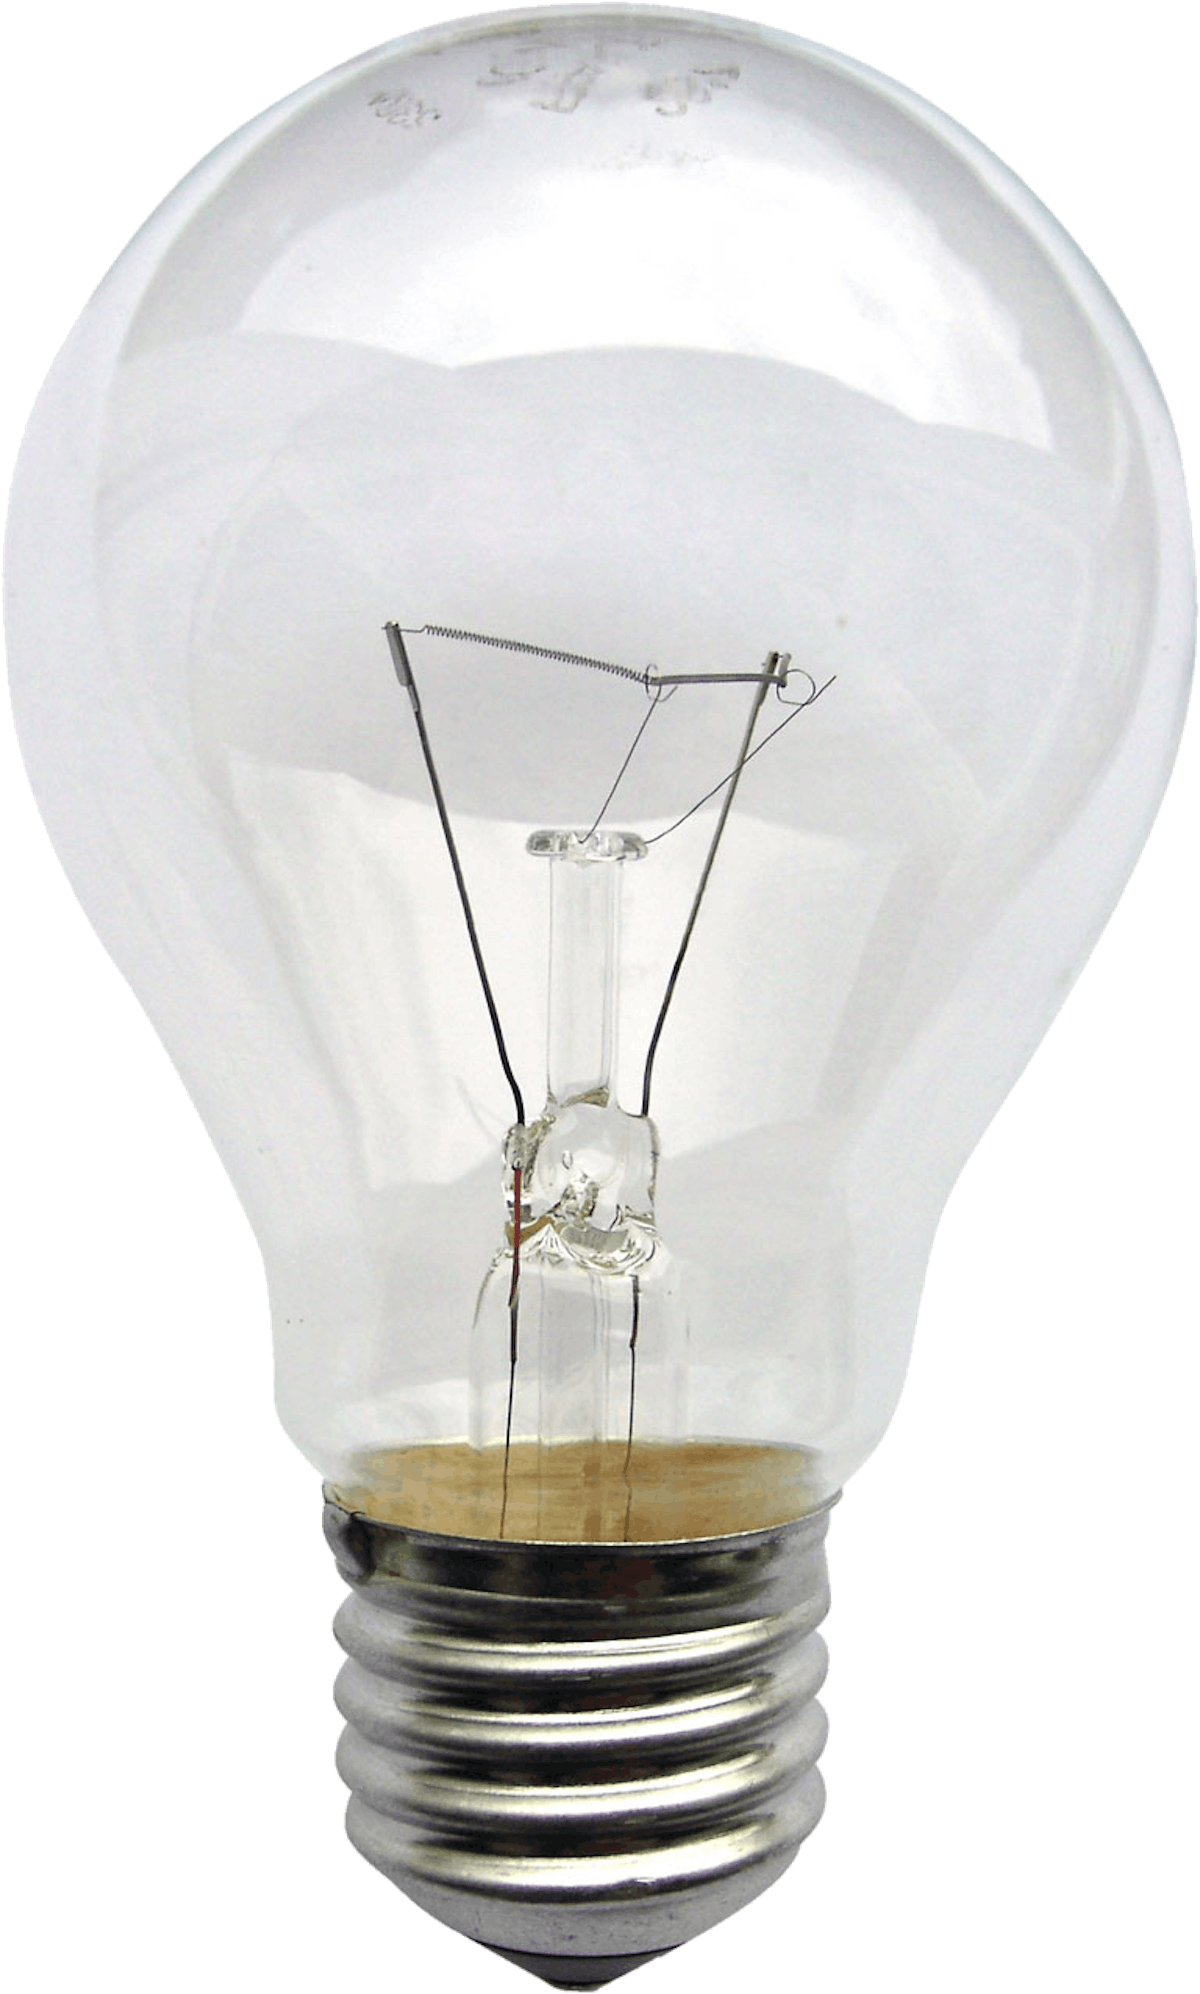 featured image - The Bitcoin Light Bulb Moment